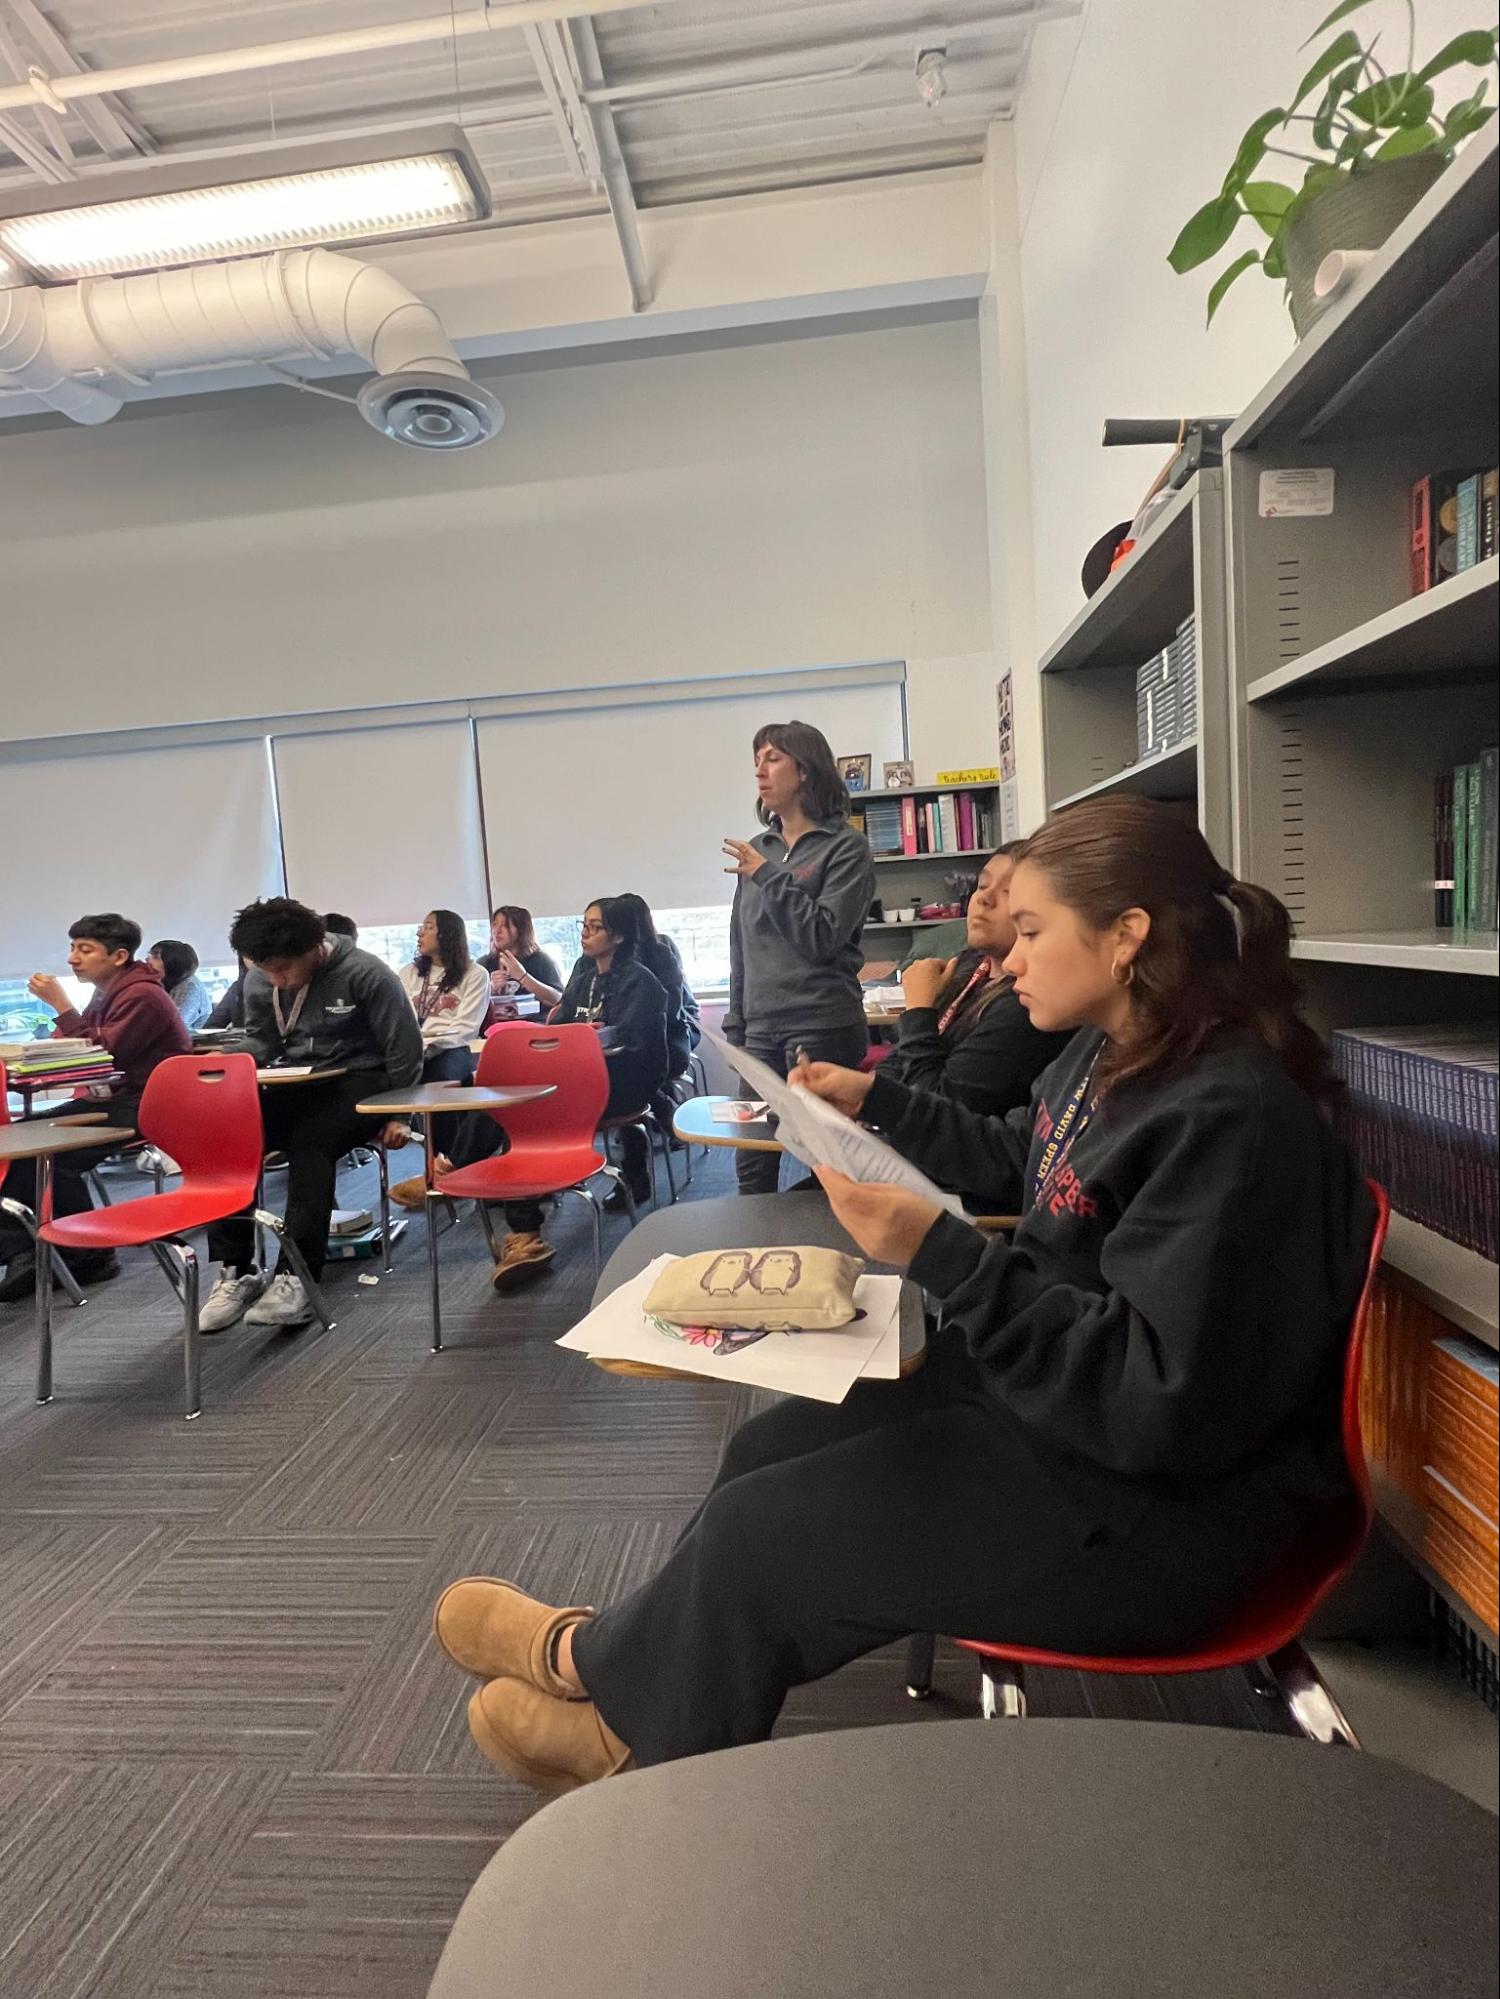 This is Ms. Swain's AP English class she is standing at the side of the room talking to students while they are reading along with a worksheet. The students are sitting at their desk alined along the classroom.